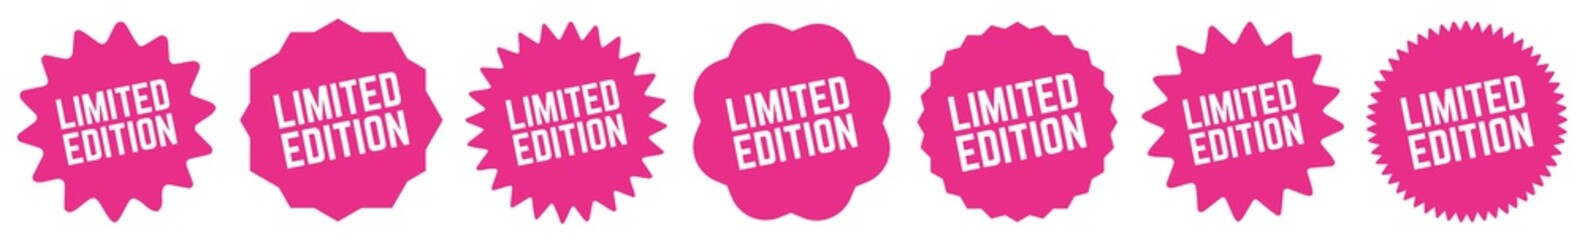 Limited Edition Tag Pink | Special Offer Icon | Sale Sticker | Deal Label | Variations